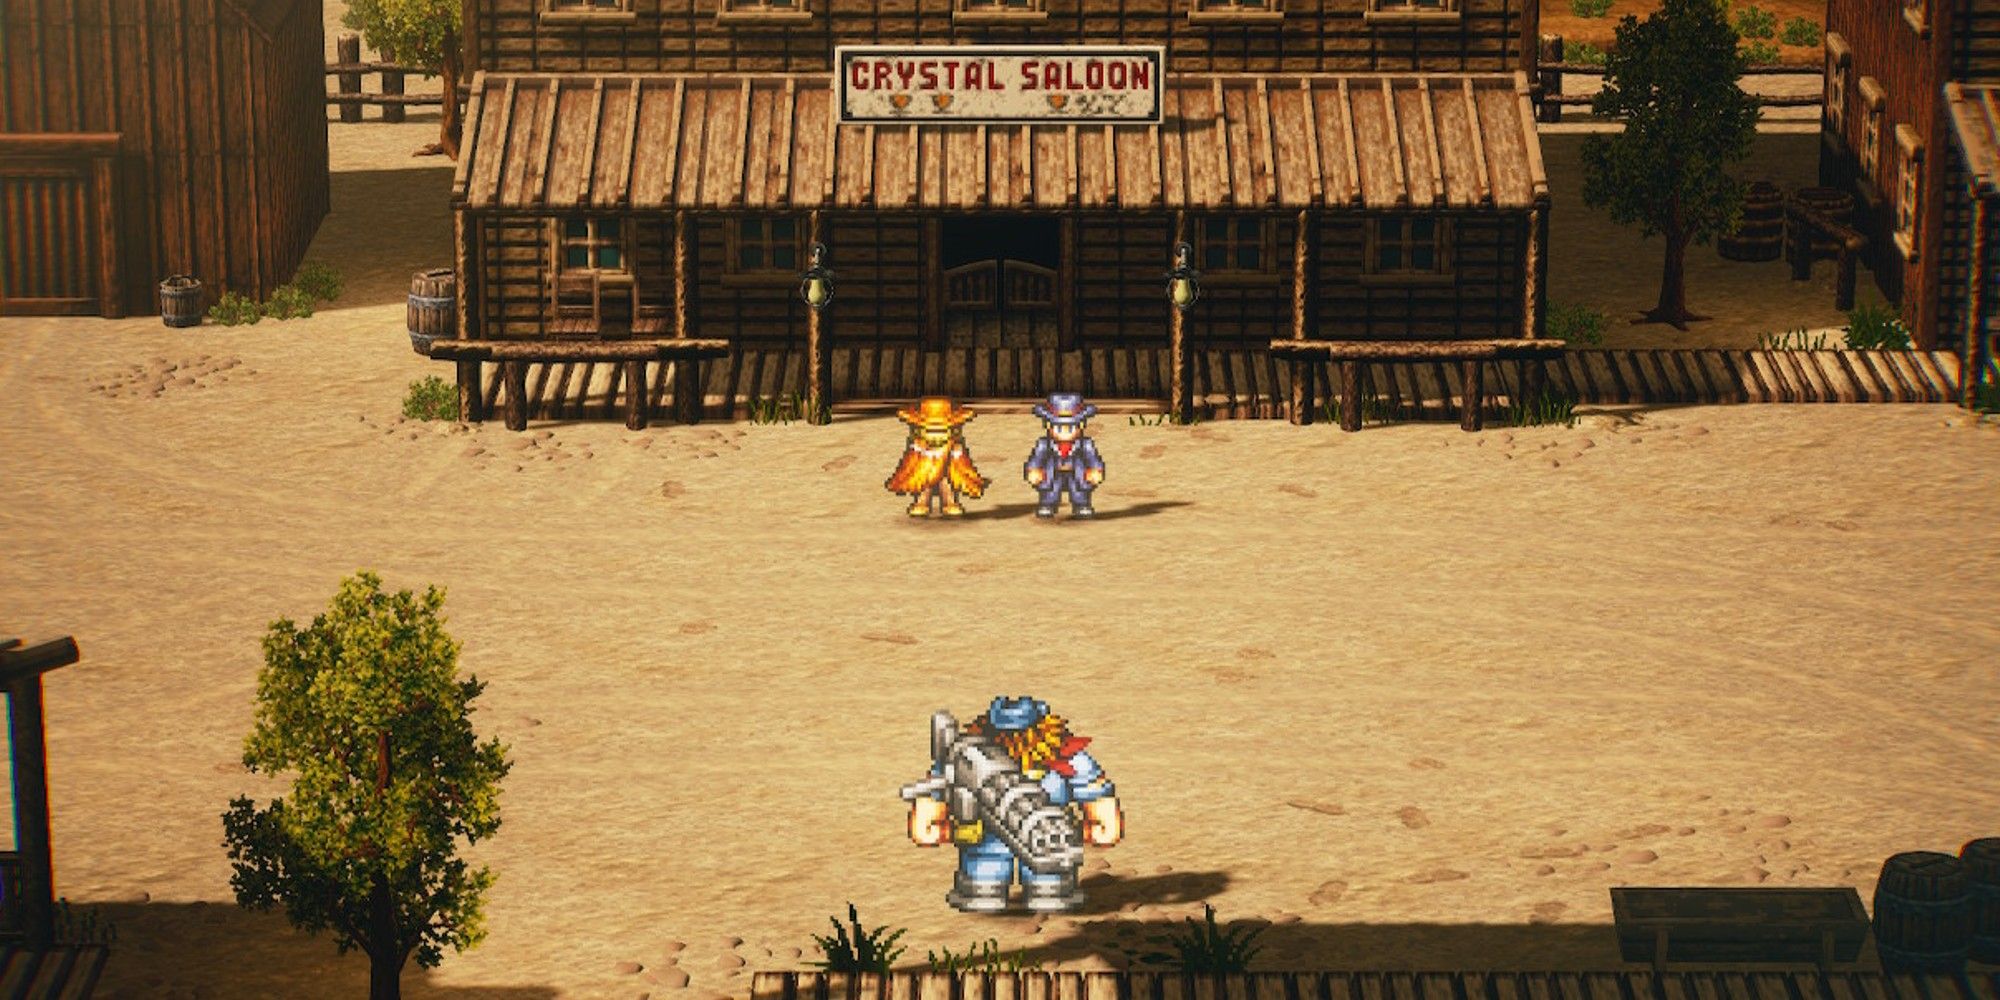 Cowboys stand off outside a saloon in Wild West chapter.